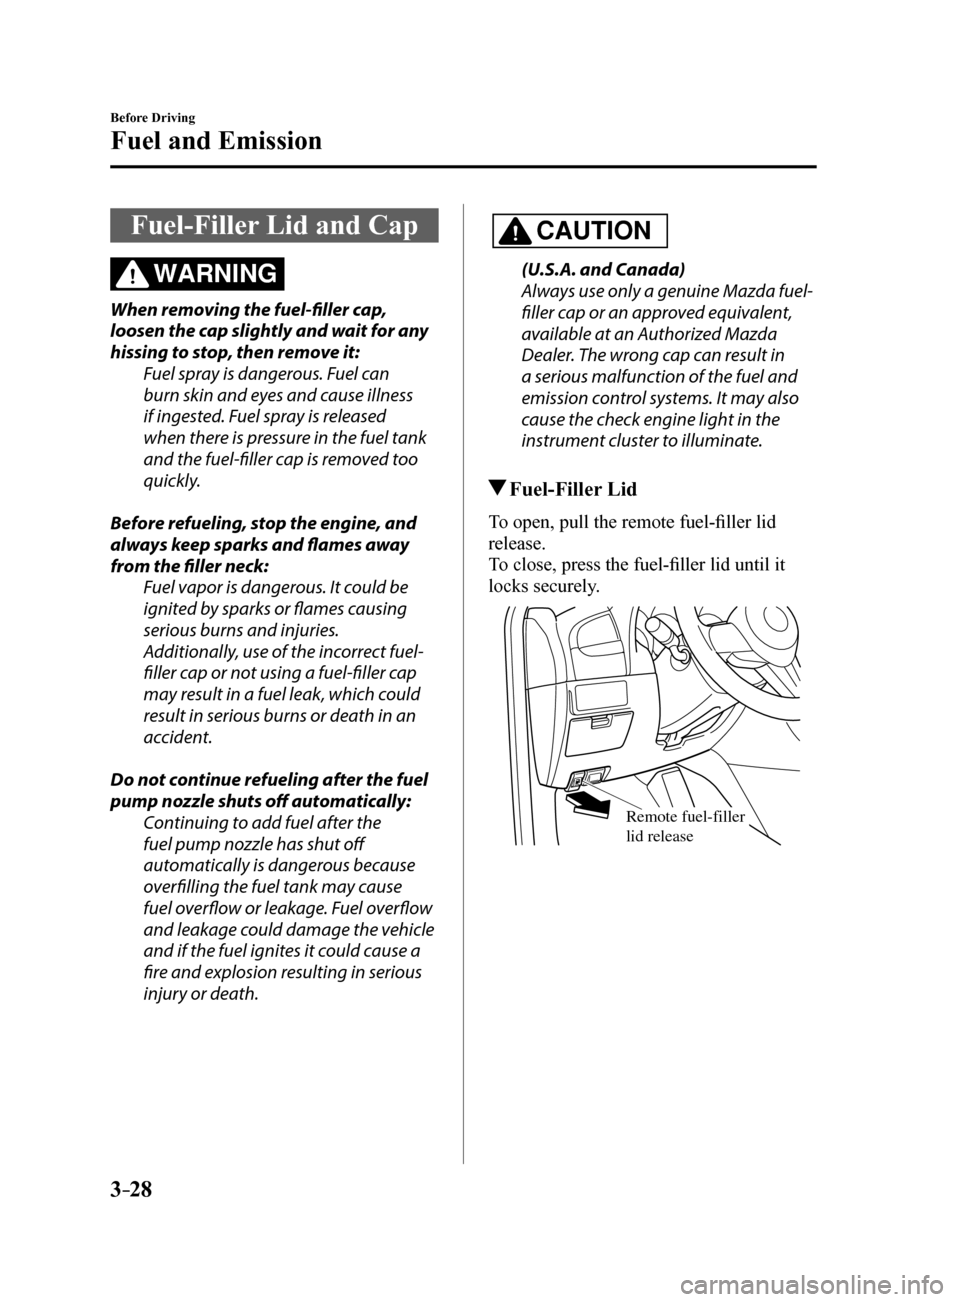 MAZDA MODEL 6 2017  Owners Manual (in English) 3–28
Before Driving
Fuel and Emission
Fuel-Filler Lid and Cap
WARNING
When removing the fuel-filler cap, 
loosen the cap slightly and wait for any 
hissing to stop, then remove it:Fuel spray is dang